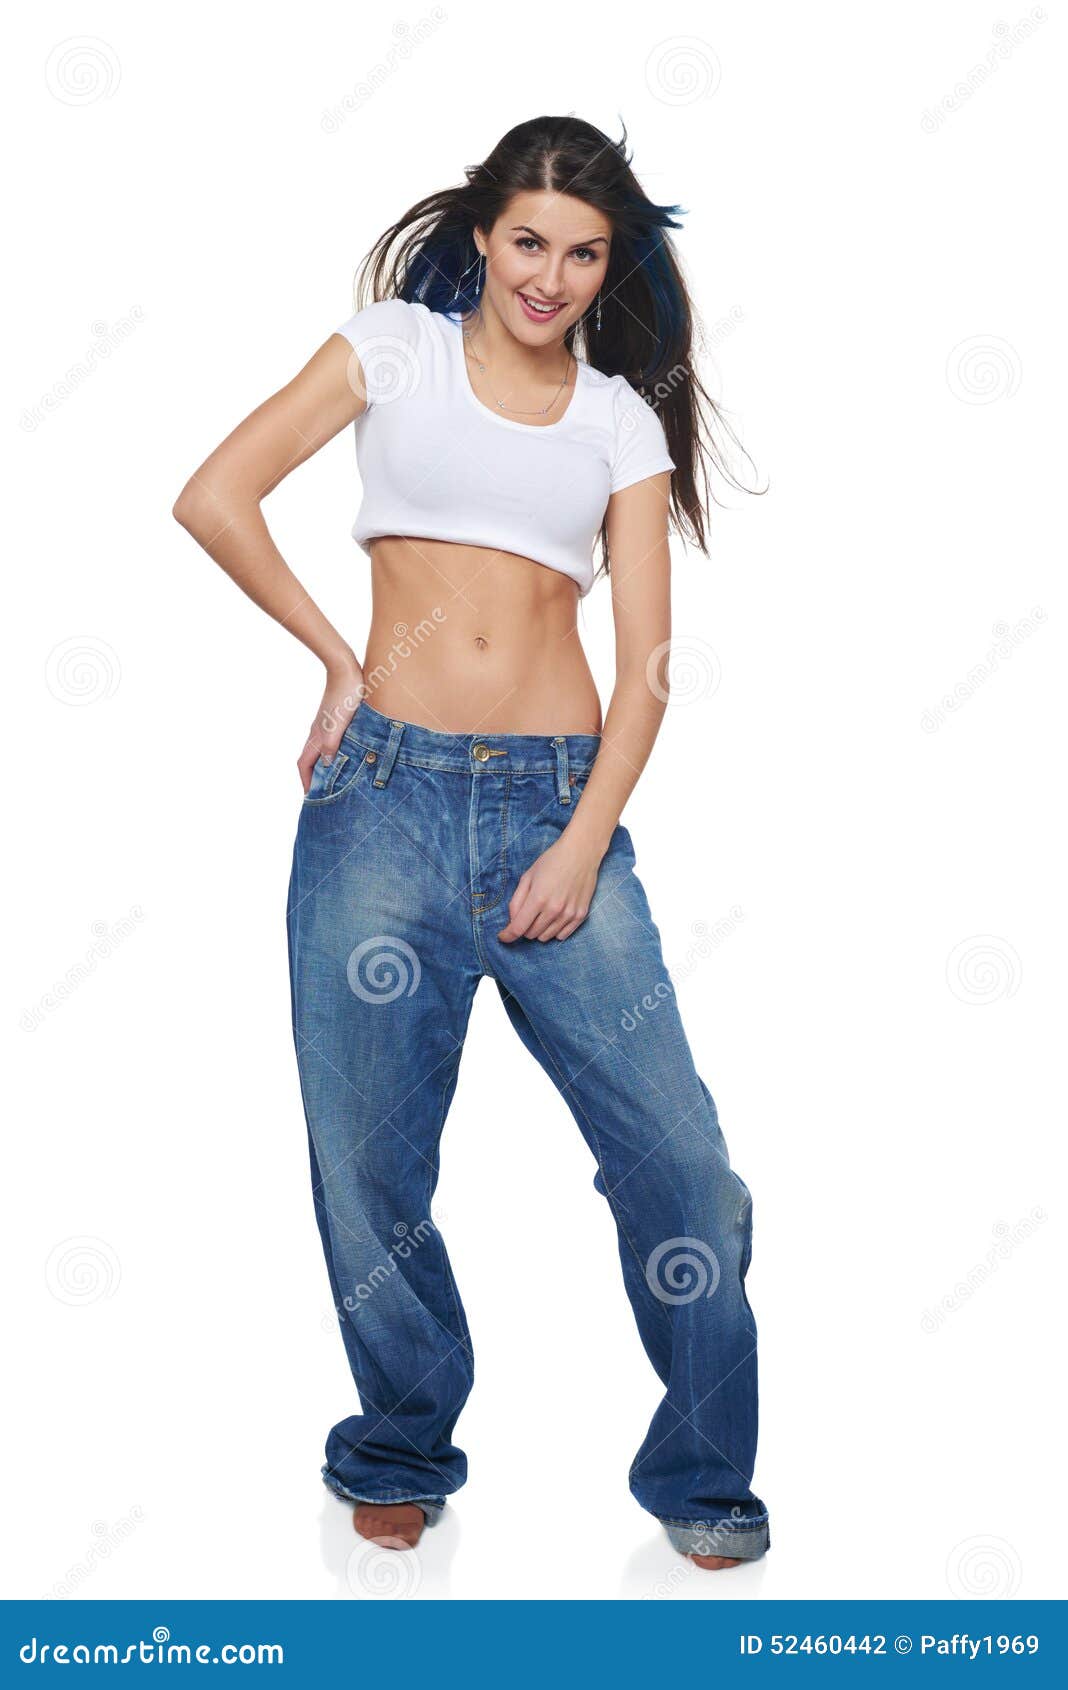 Funk girl in big jeans stock photo. Image of portrait - 52460442